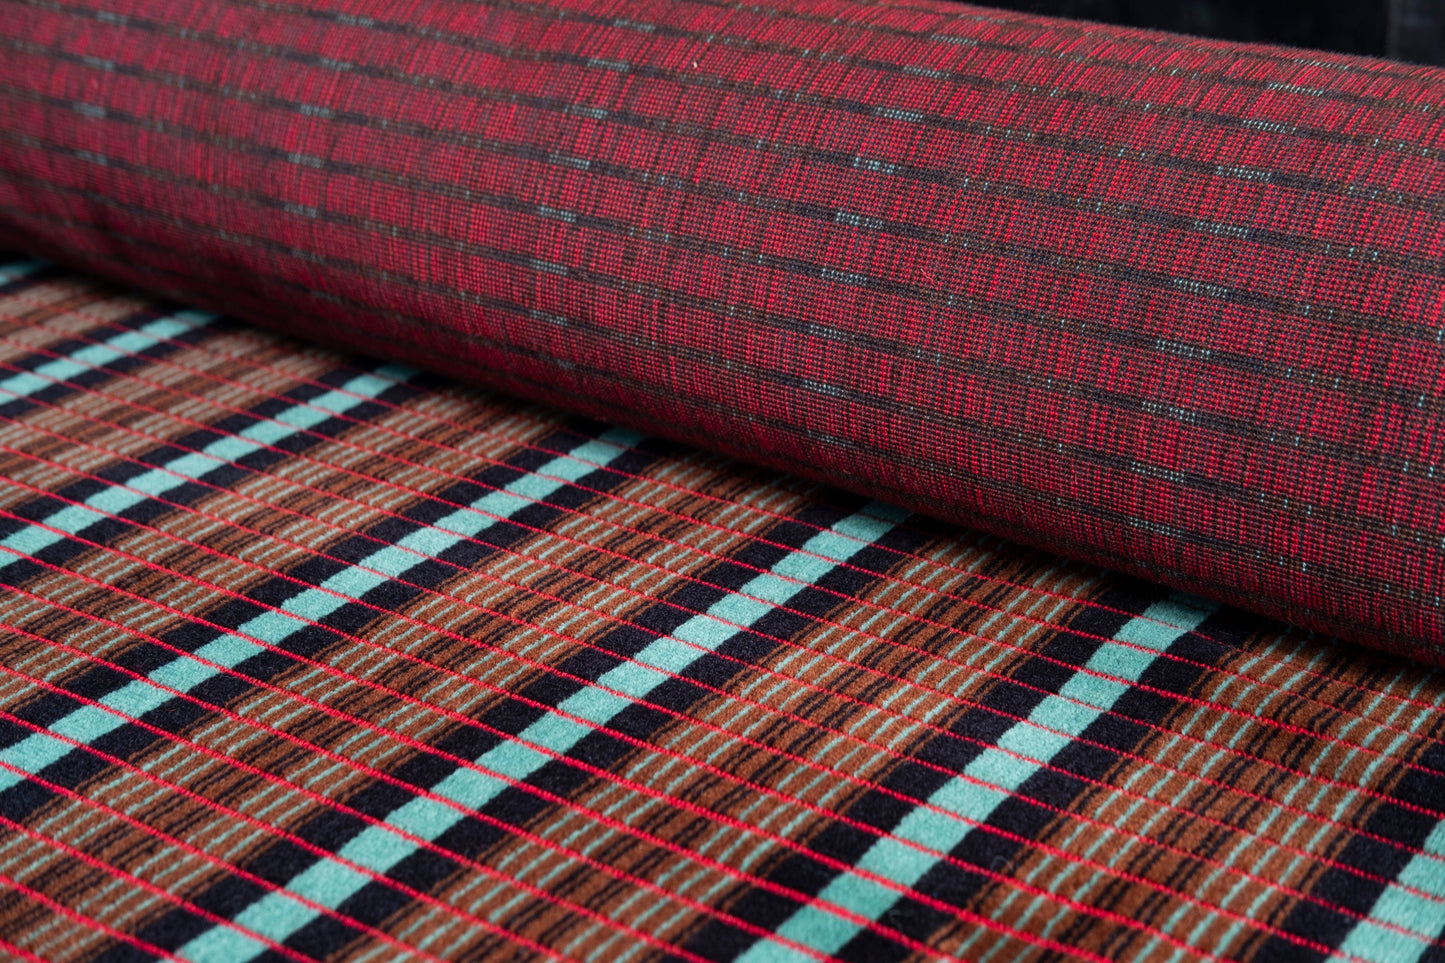 London Bus (1950's) RT Bus Moquette Fabric sold by the Metre